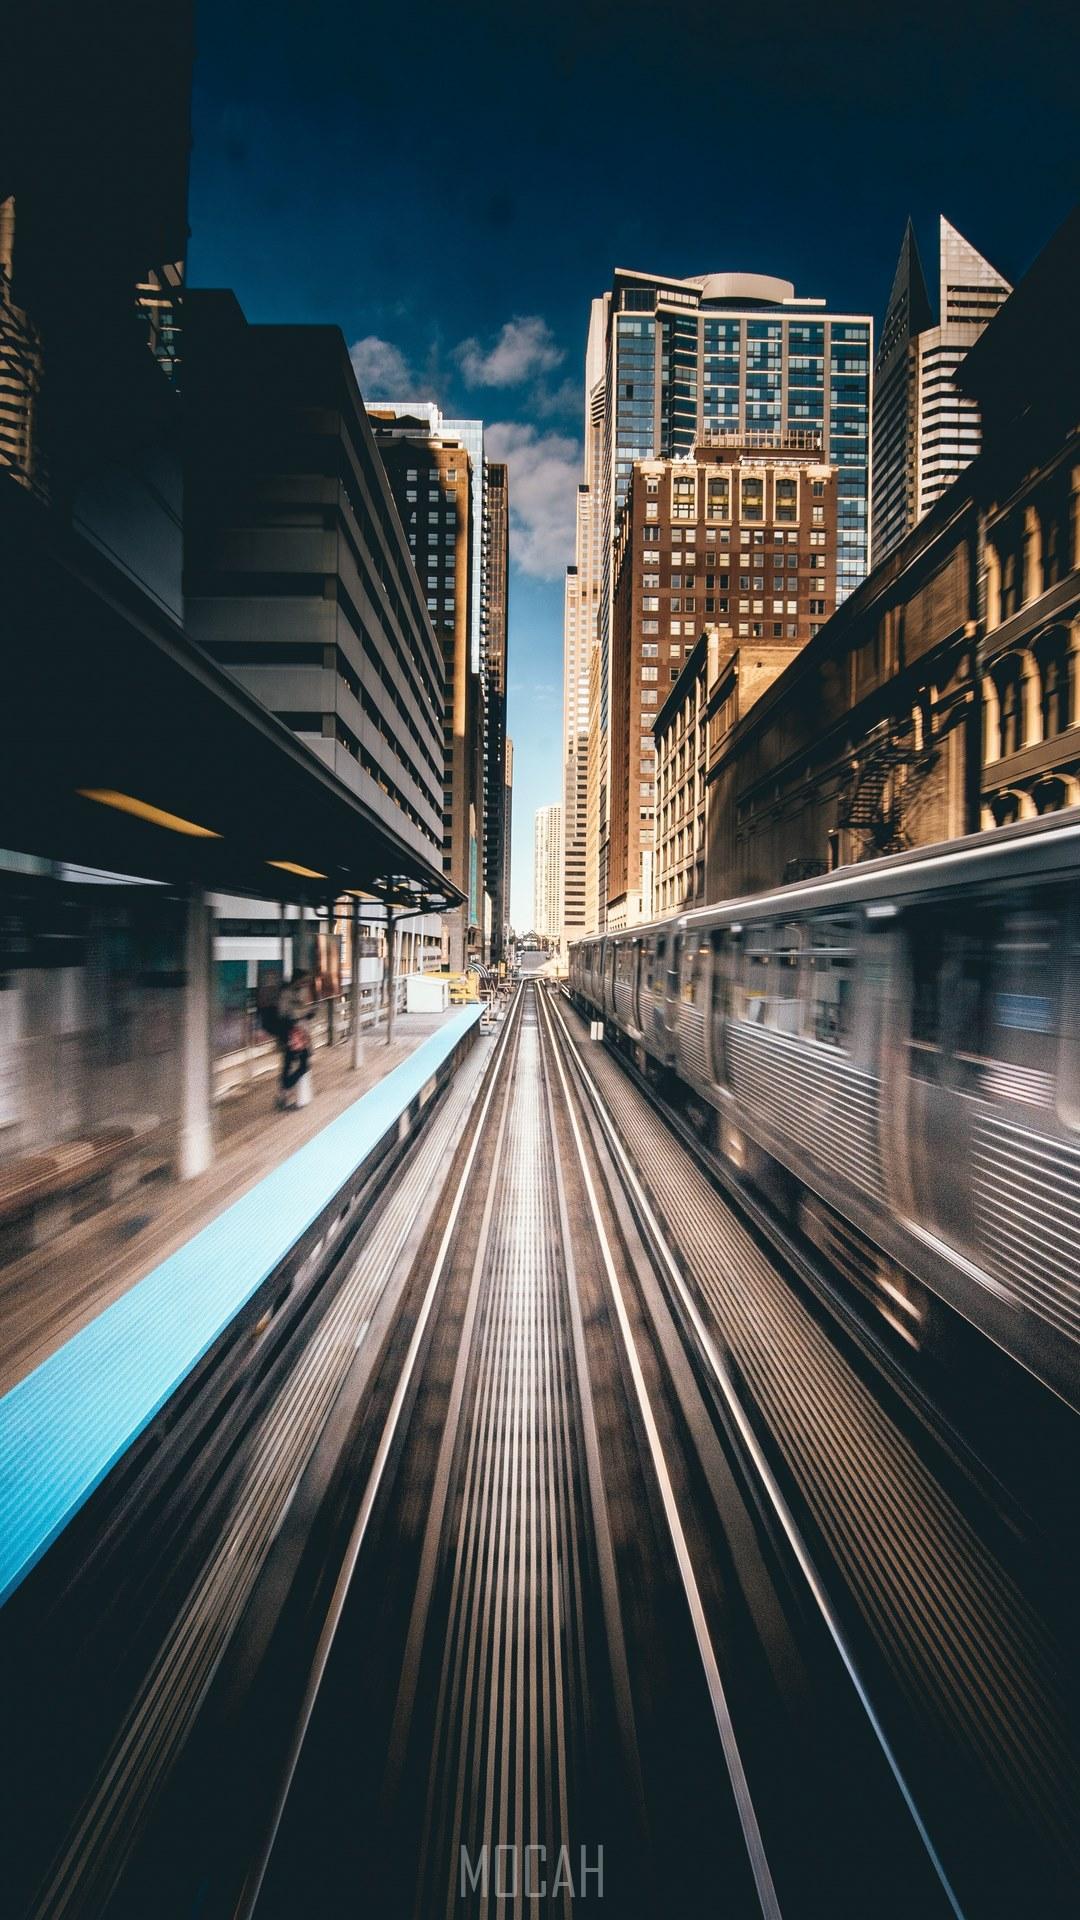 HD wallpaper, 1080X1920, A Blurred Image Showing Trains Moving On An Outdoor Railway In Chicago, Lenovo K8 Plus Wallpaper Full Hd, Train Station Action In Chicago